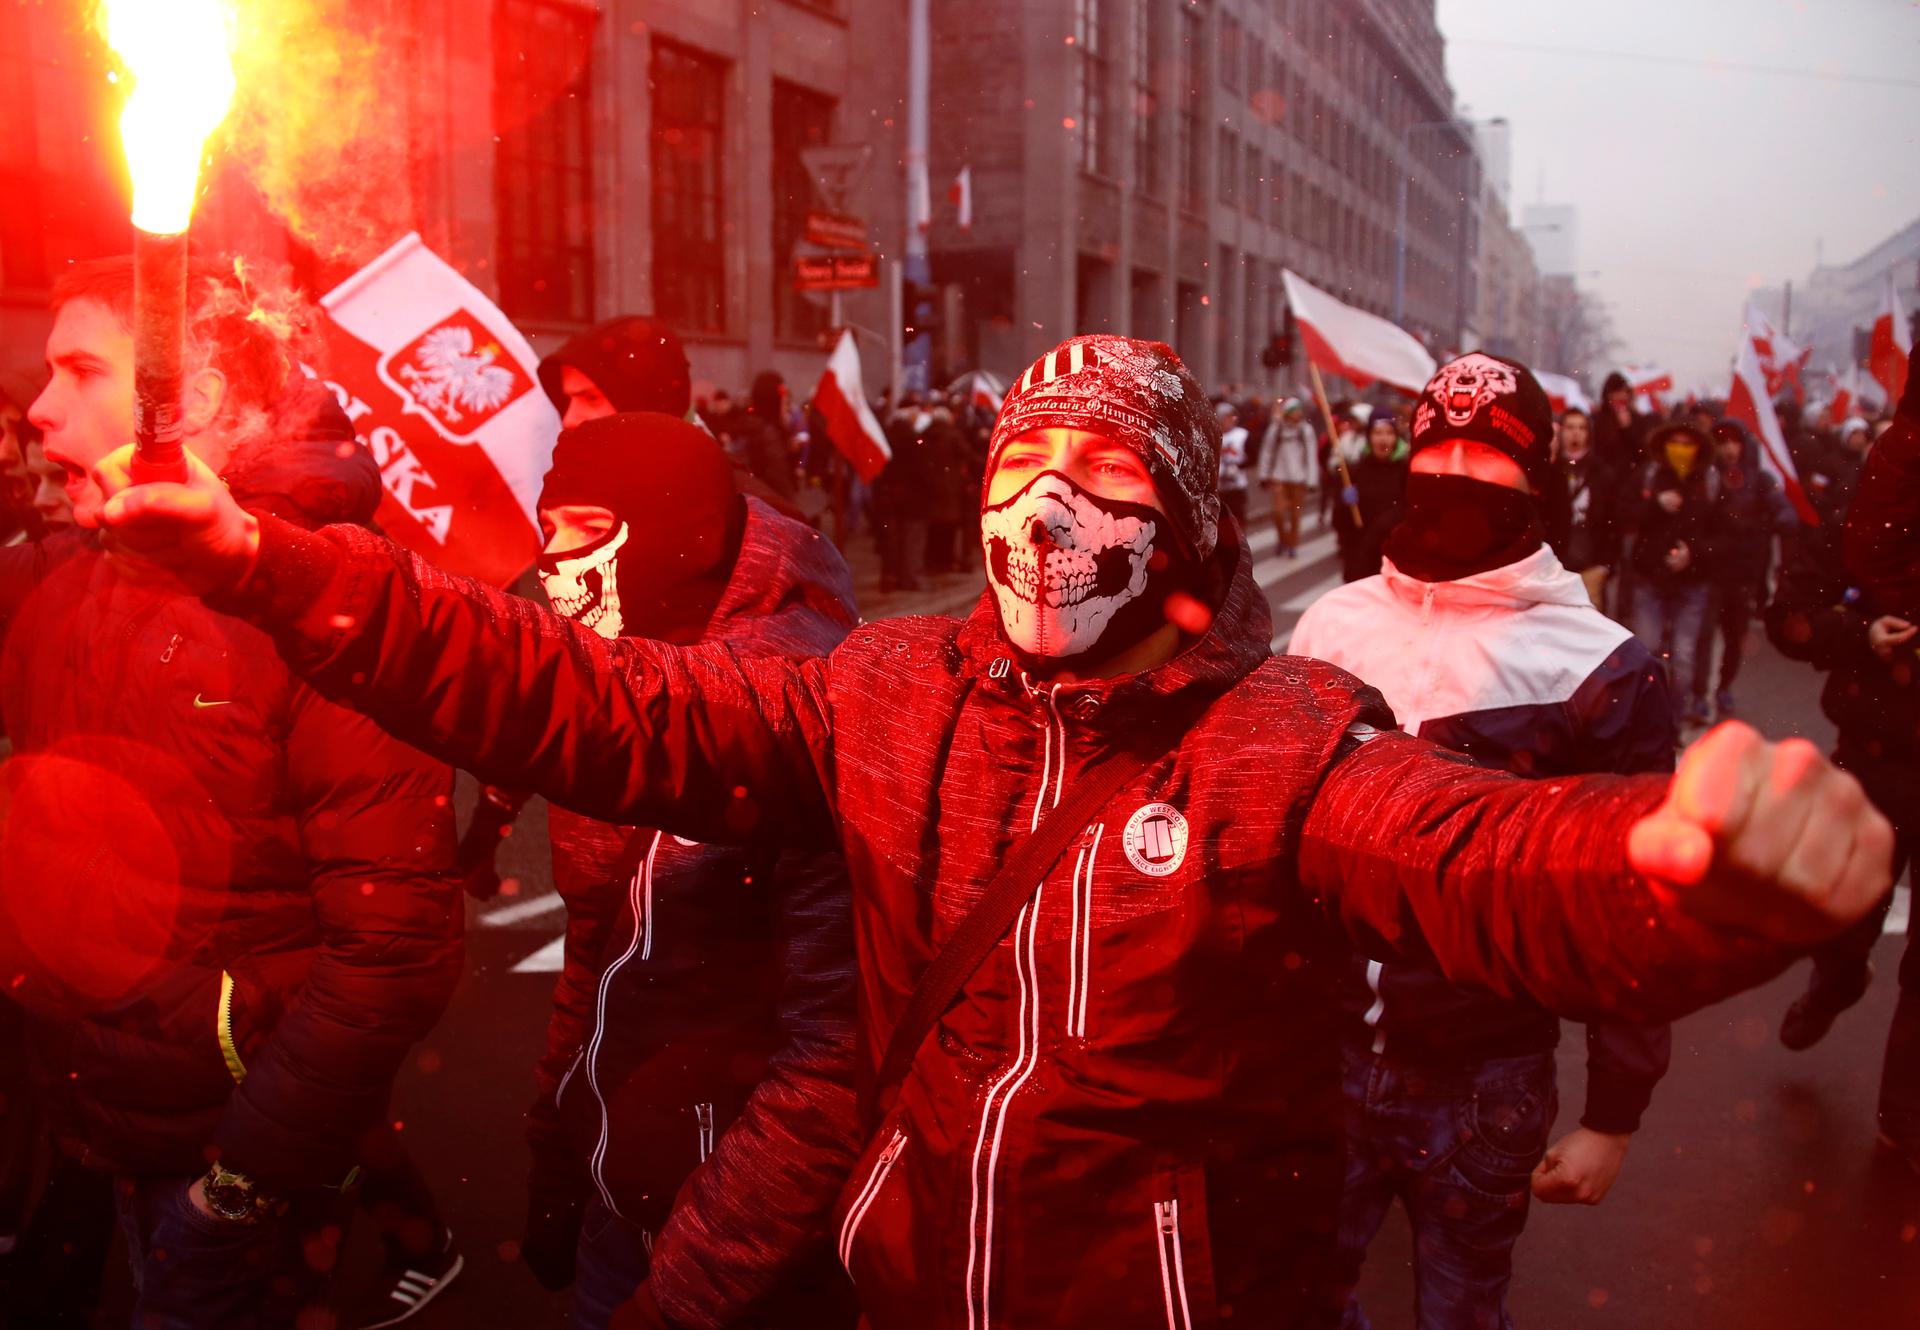 Protesters light flares and carry Polish flags during a rally, organised by far-right, nationalist groups, to mark the anniversary of Polish independence in Warsaw. 